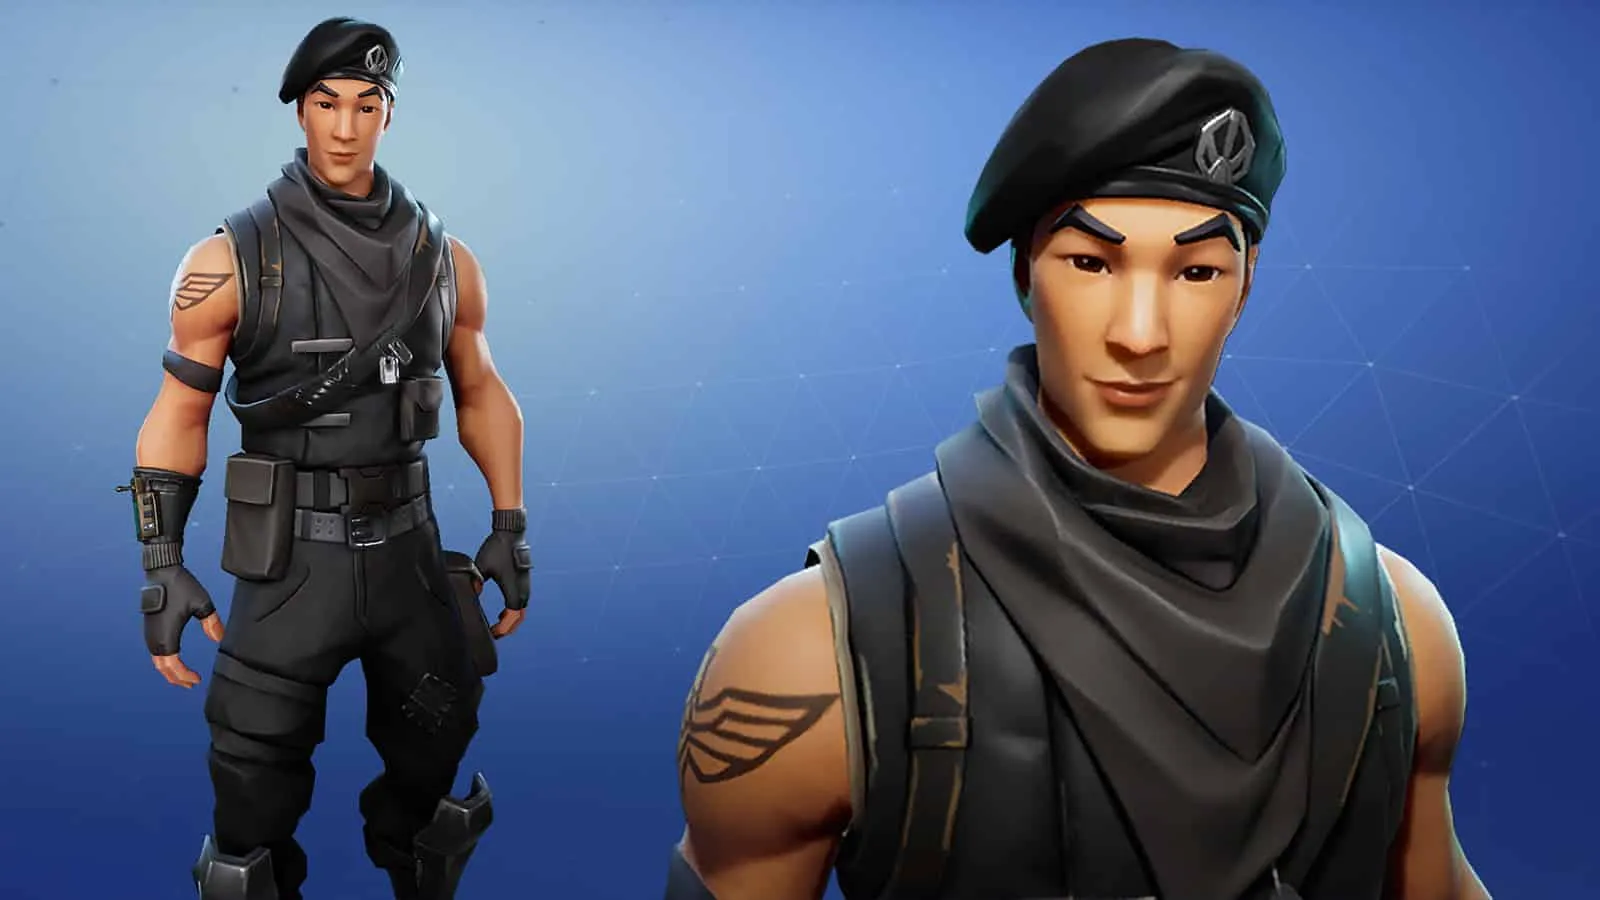 8 Fortnite skins that will become extremely rare in 2022